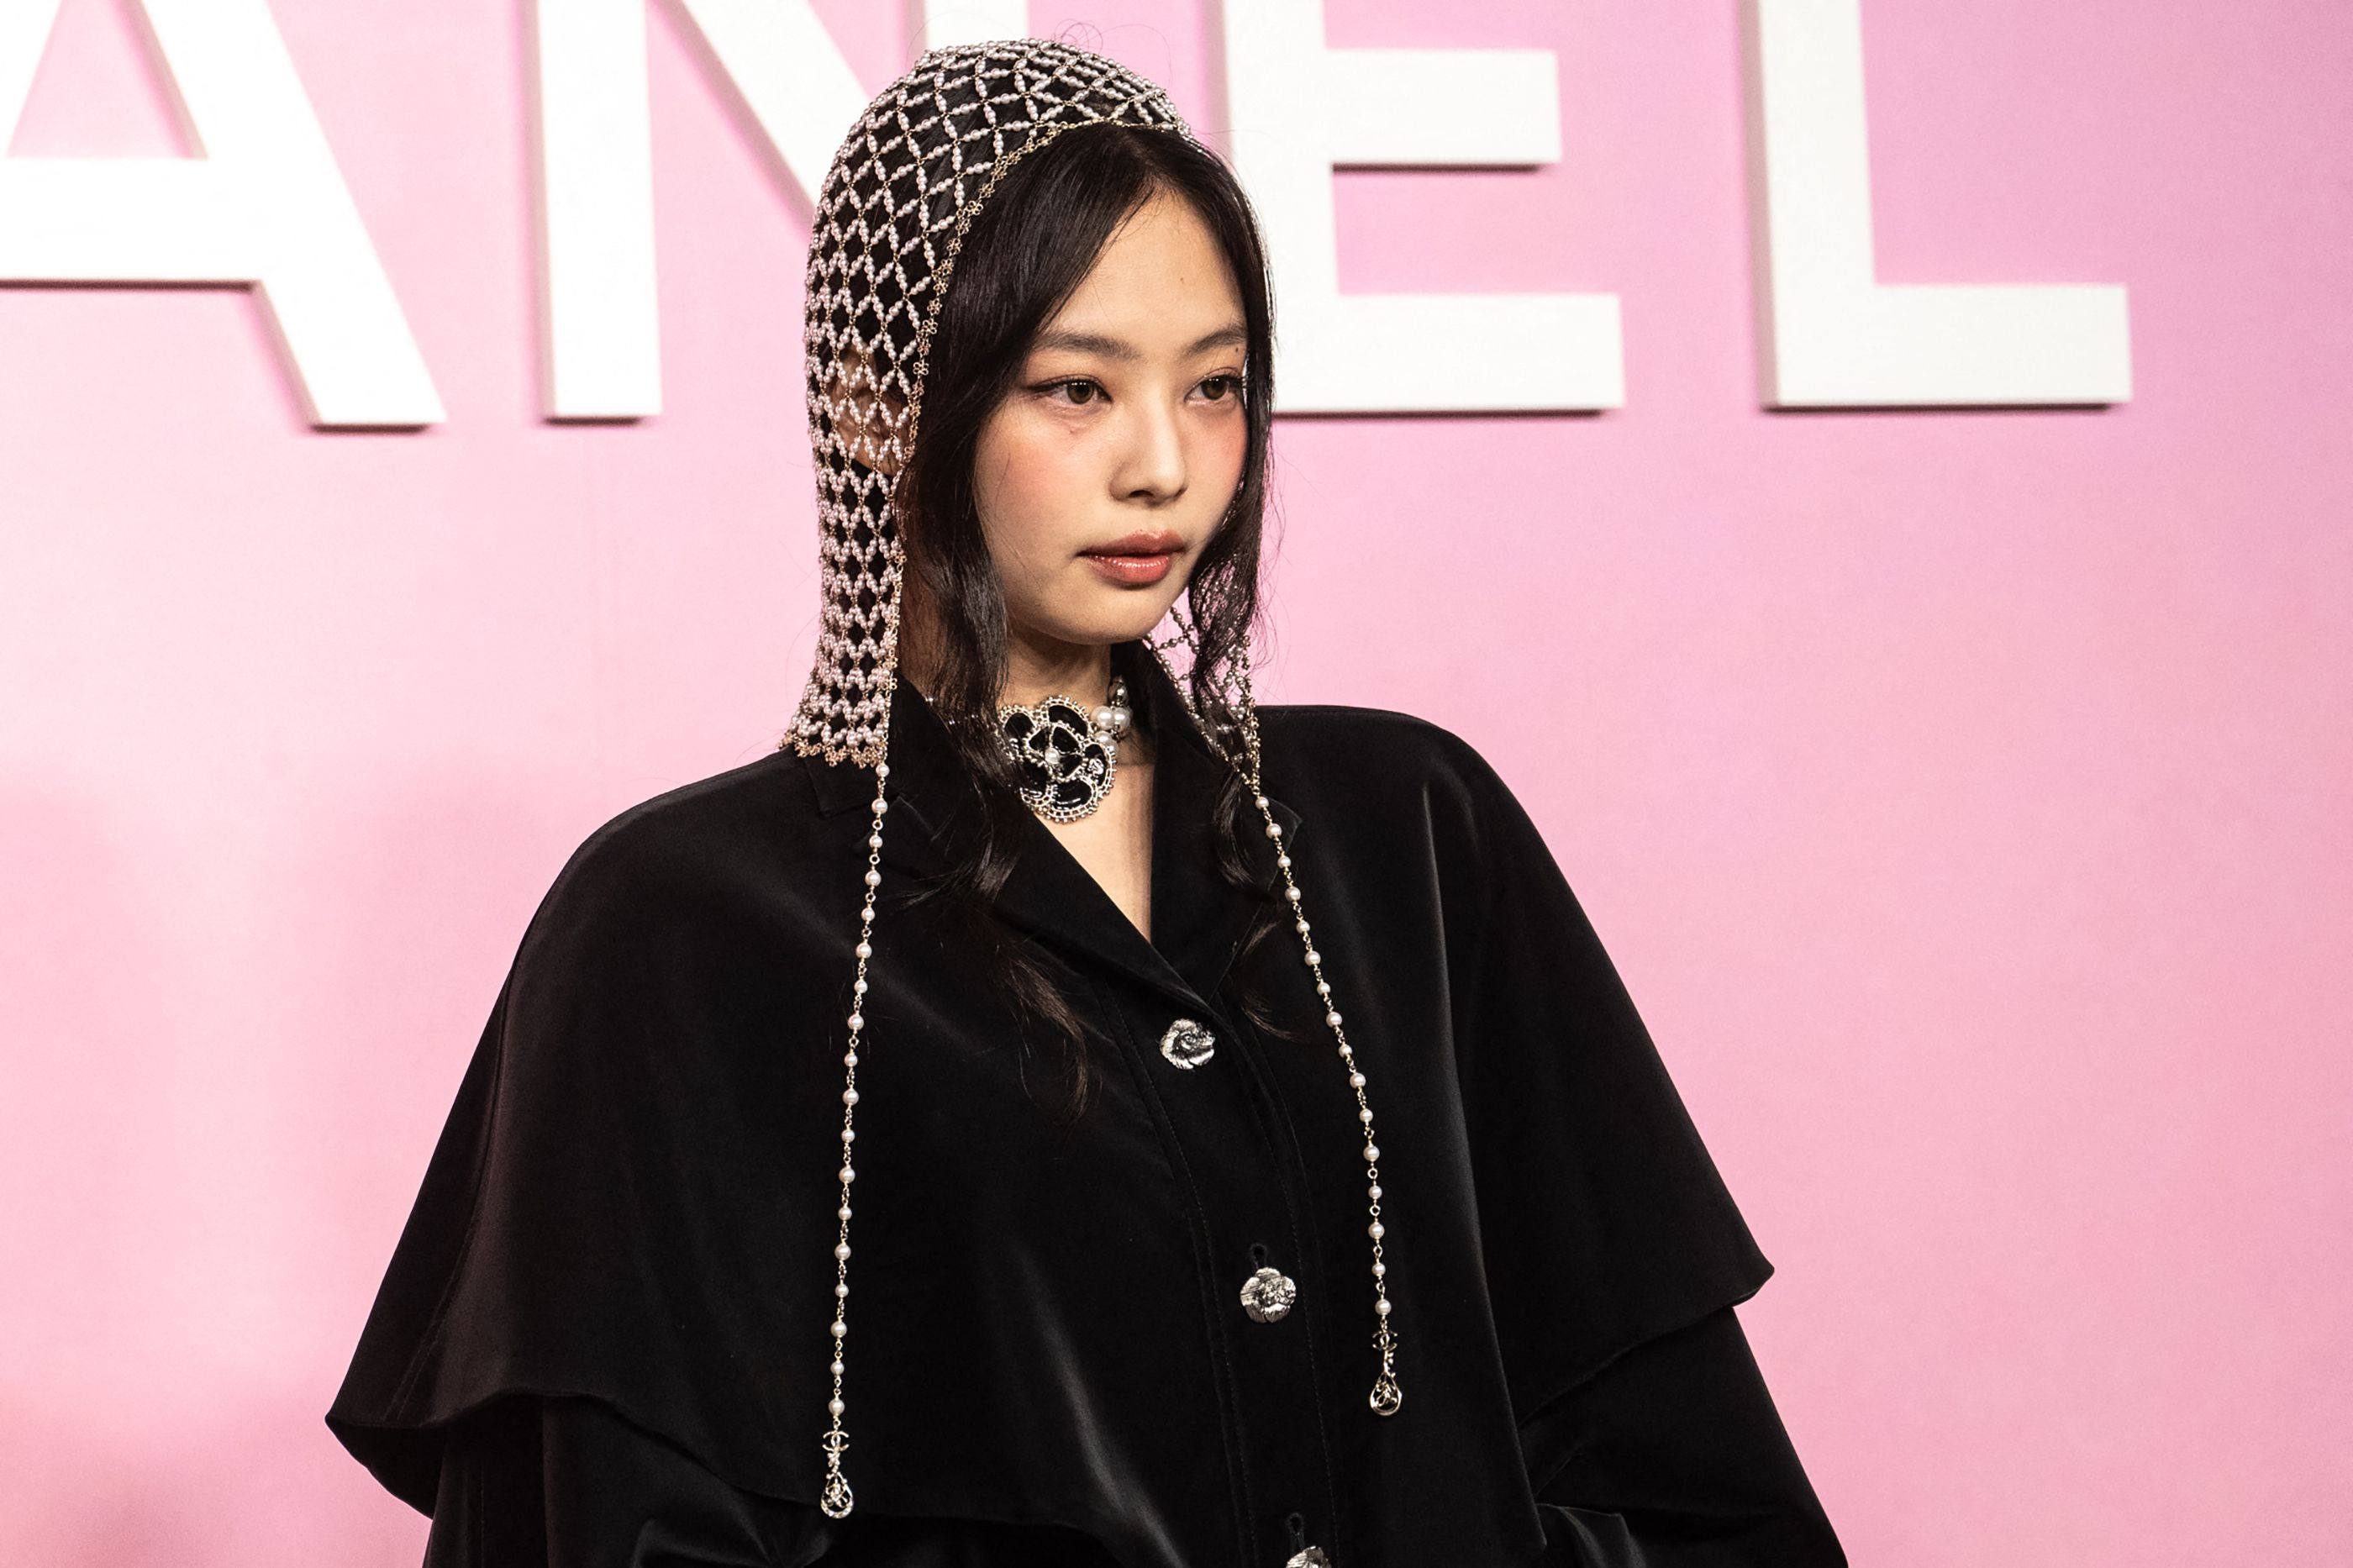 A now-deleted video showing K-pop megastar Jennie of Blackpink apparently smoking a vape indoors has sparked online outcry, with Seoul’s foreign ministry saying it had received a formal complaint. Photo: AFP